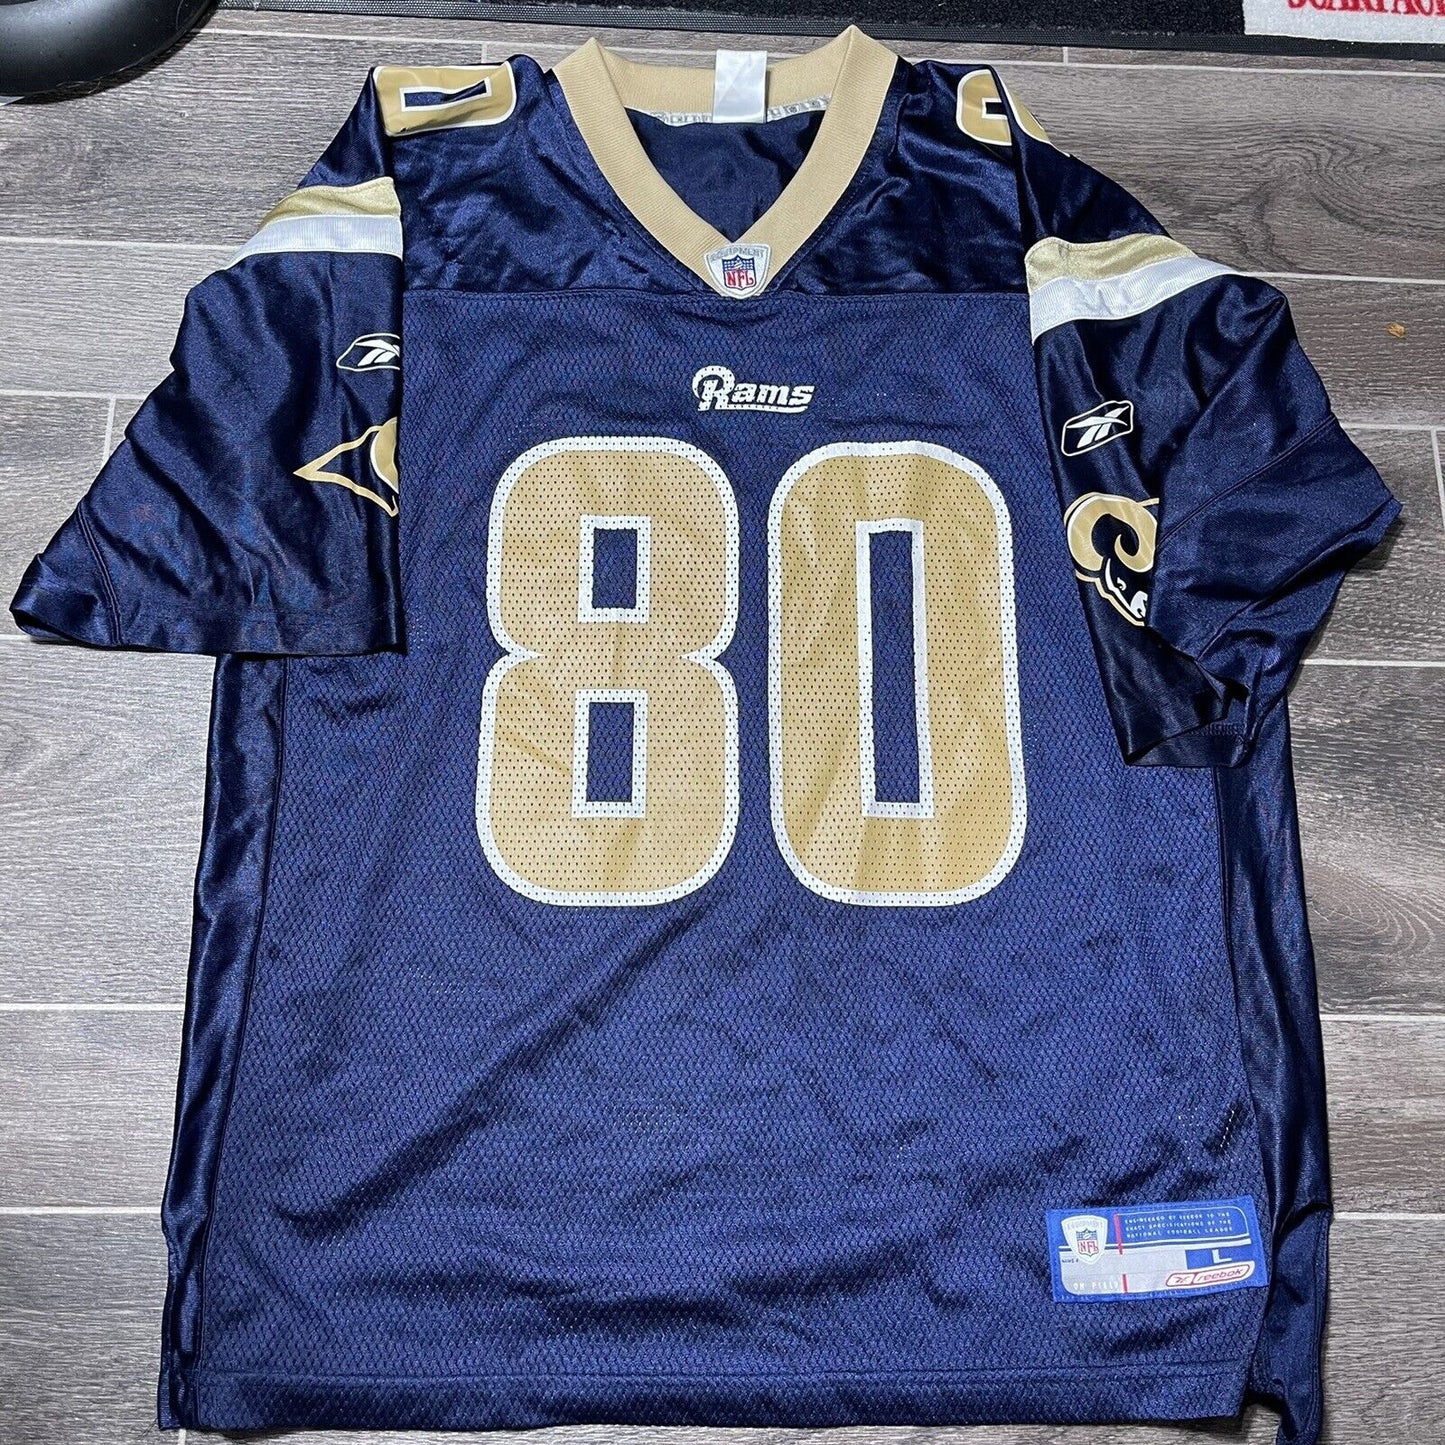 Los Angeles Rams Jersey Isaac Bruce size large Reebok blue